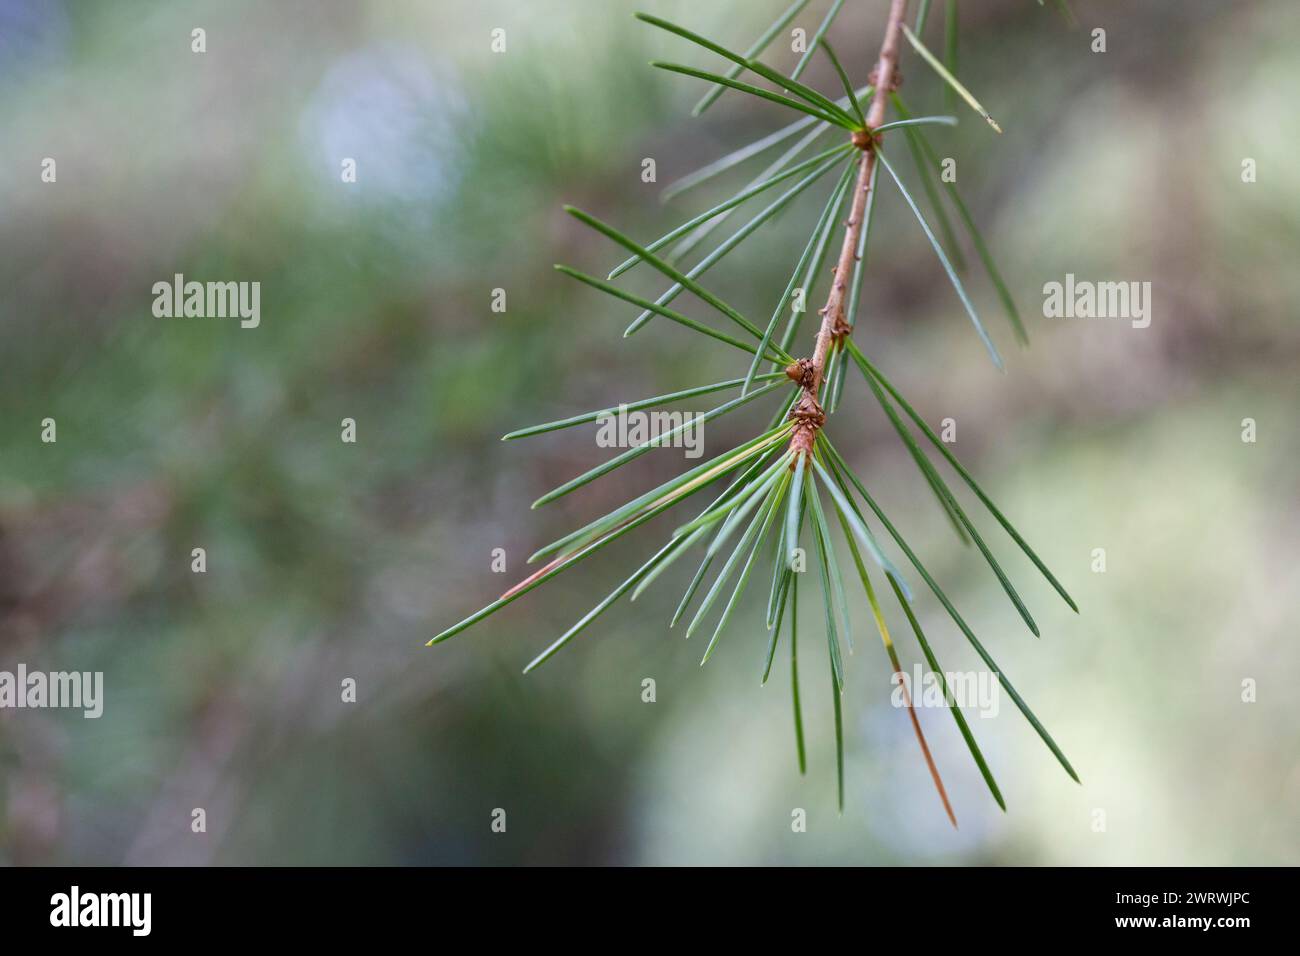 close up of the Cedrus deodara branch in park on a blurred background Stock Photo